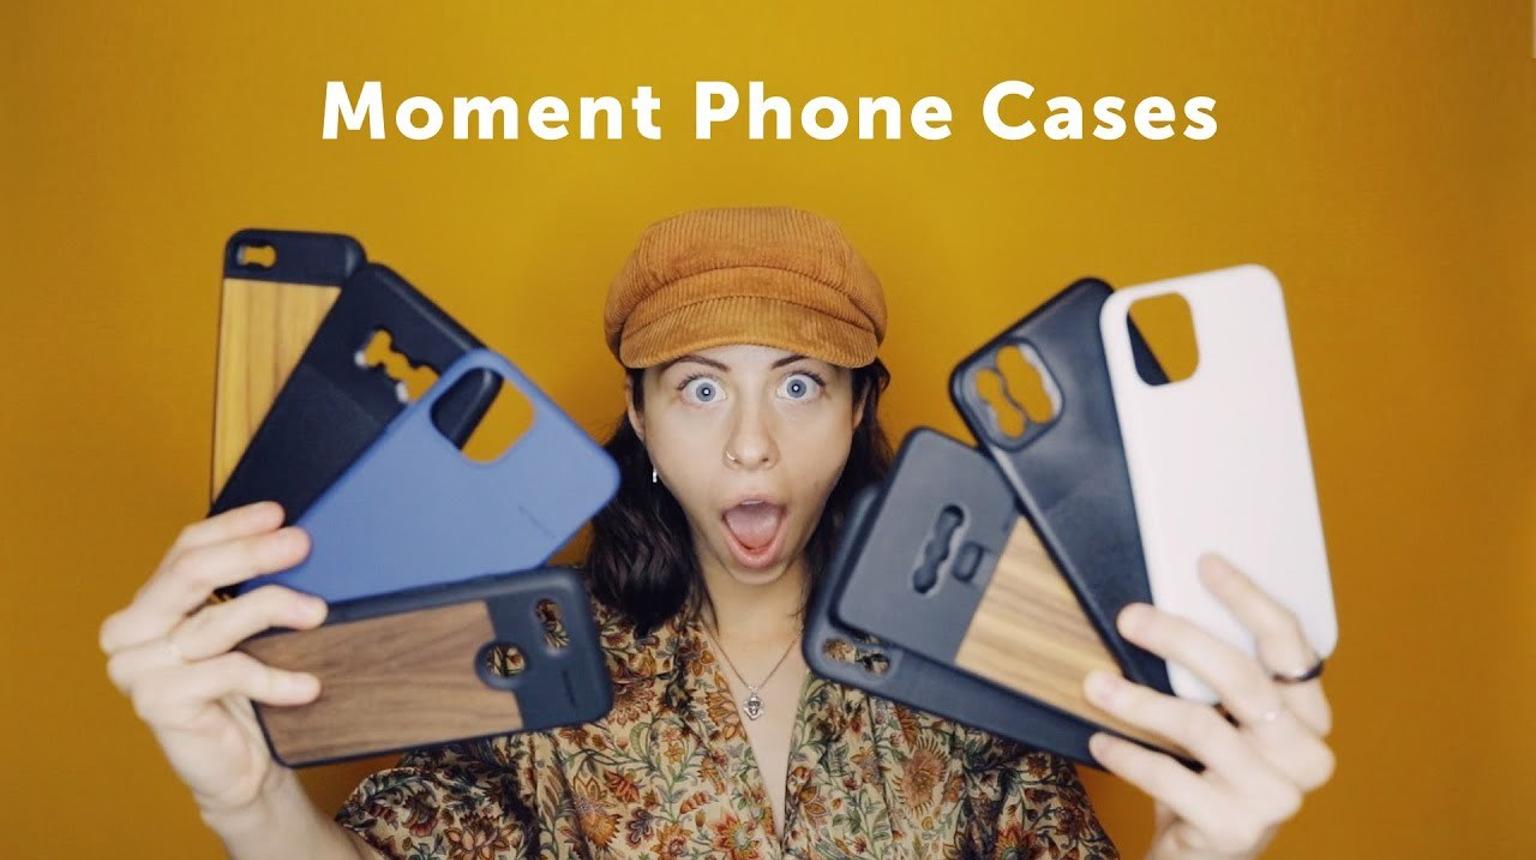 Moment which case is right for you thumbnail